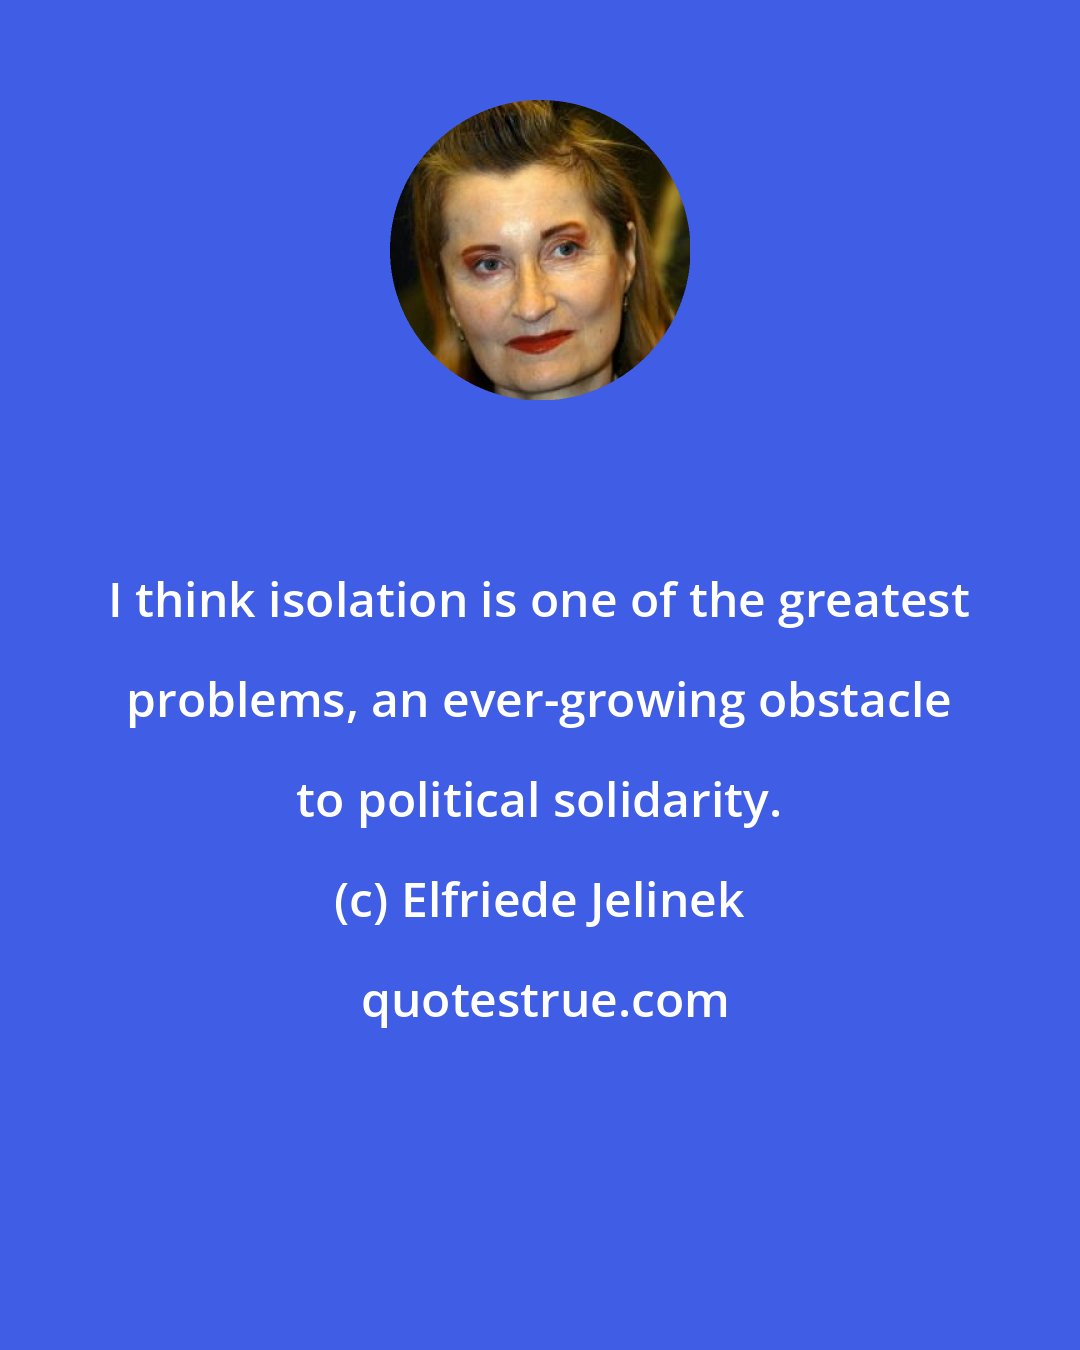 Elfriede Jelinek: I think isolation is one of the greatest problems, an ever-growing obstacle to political solidarity.